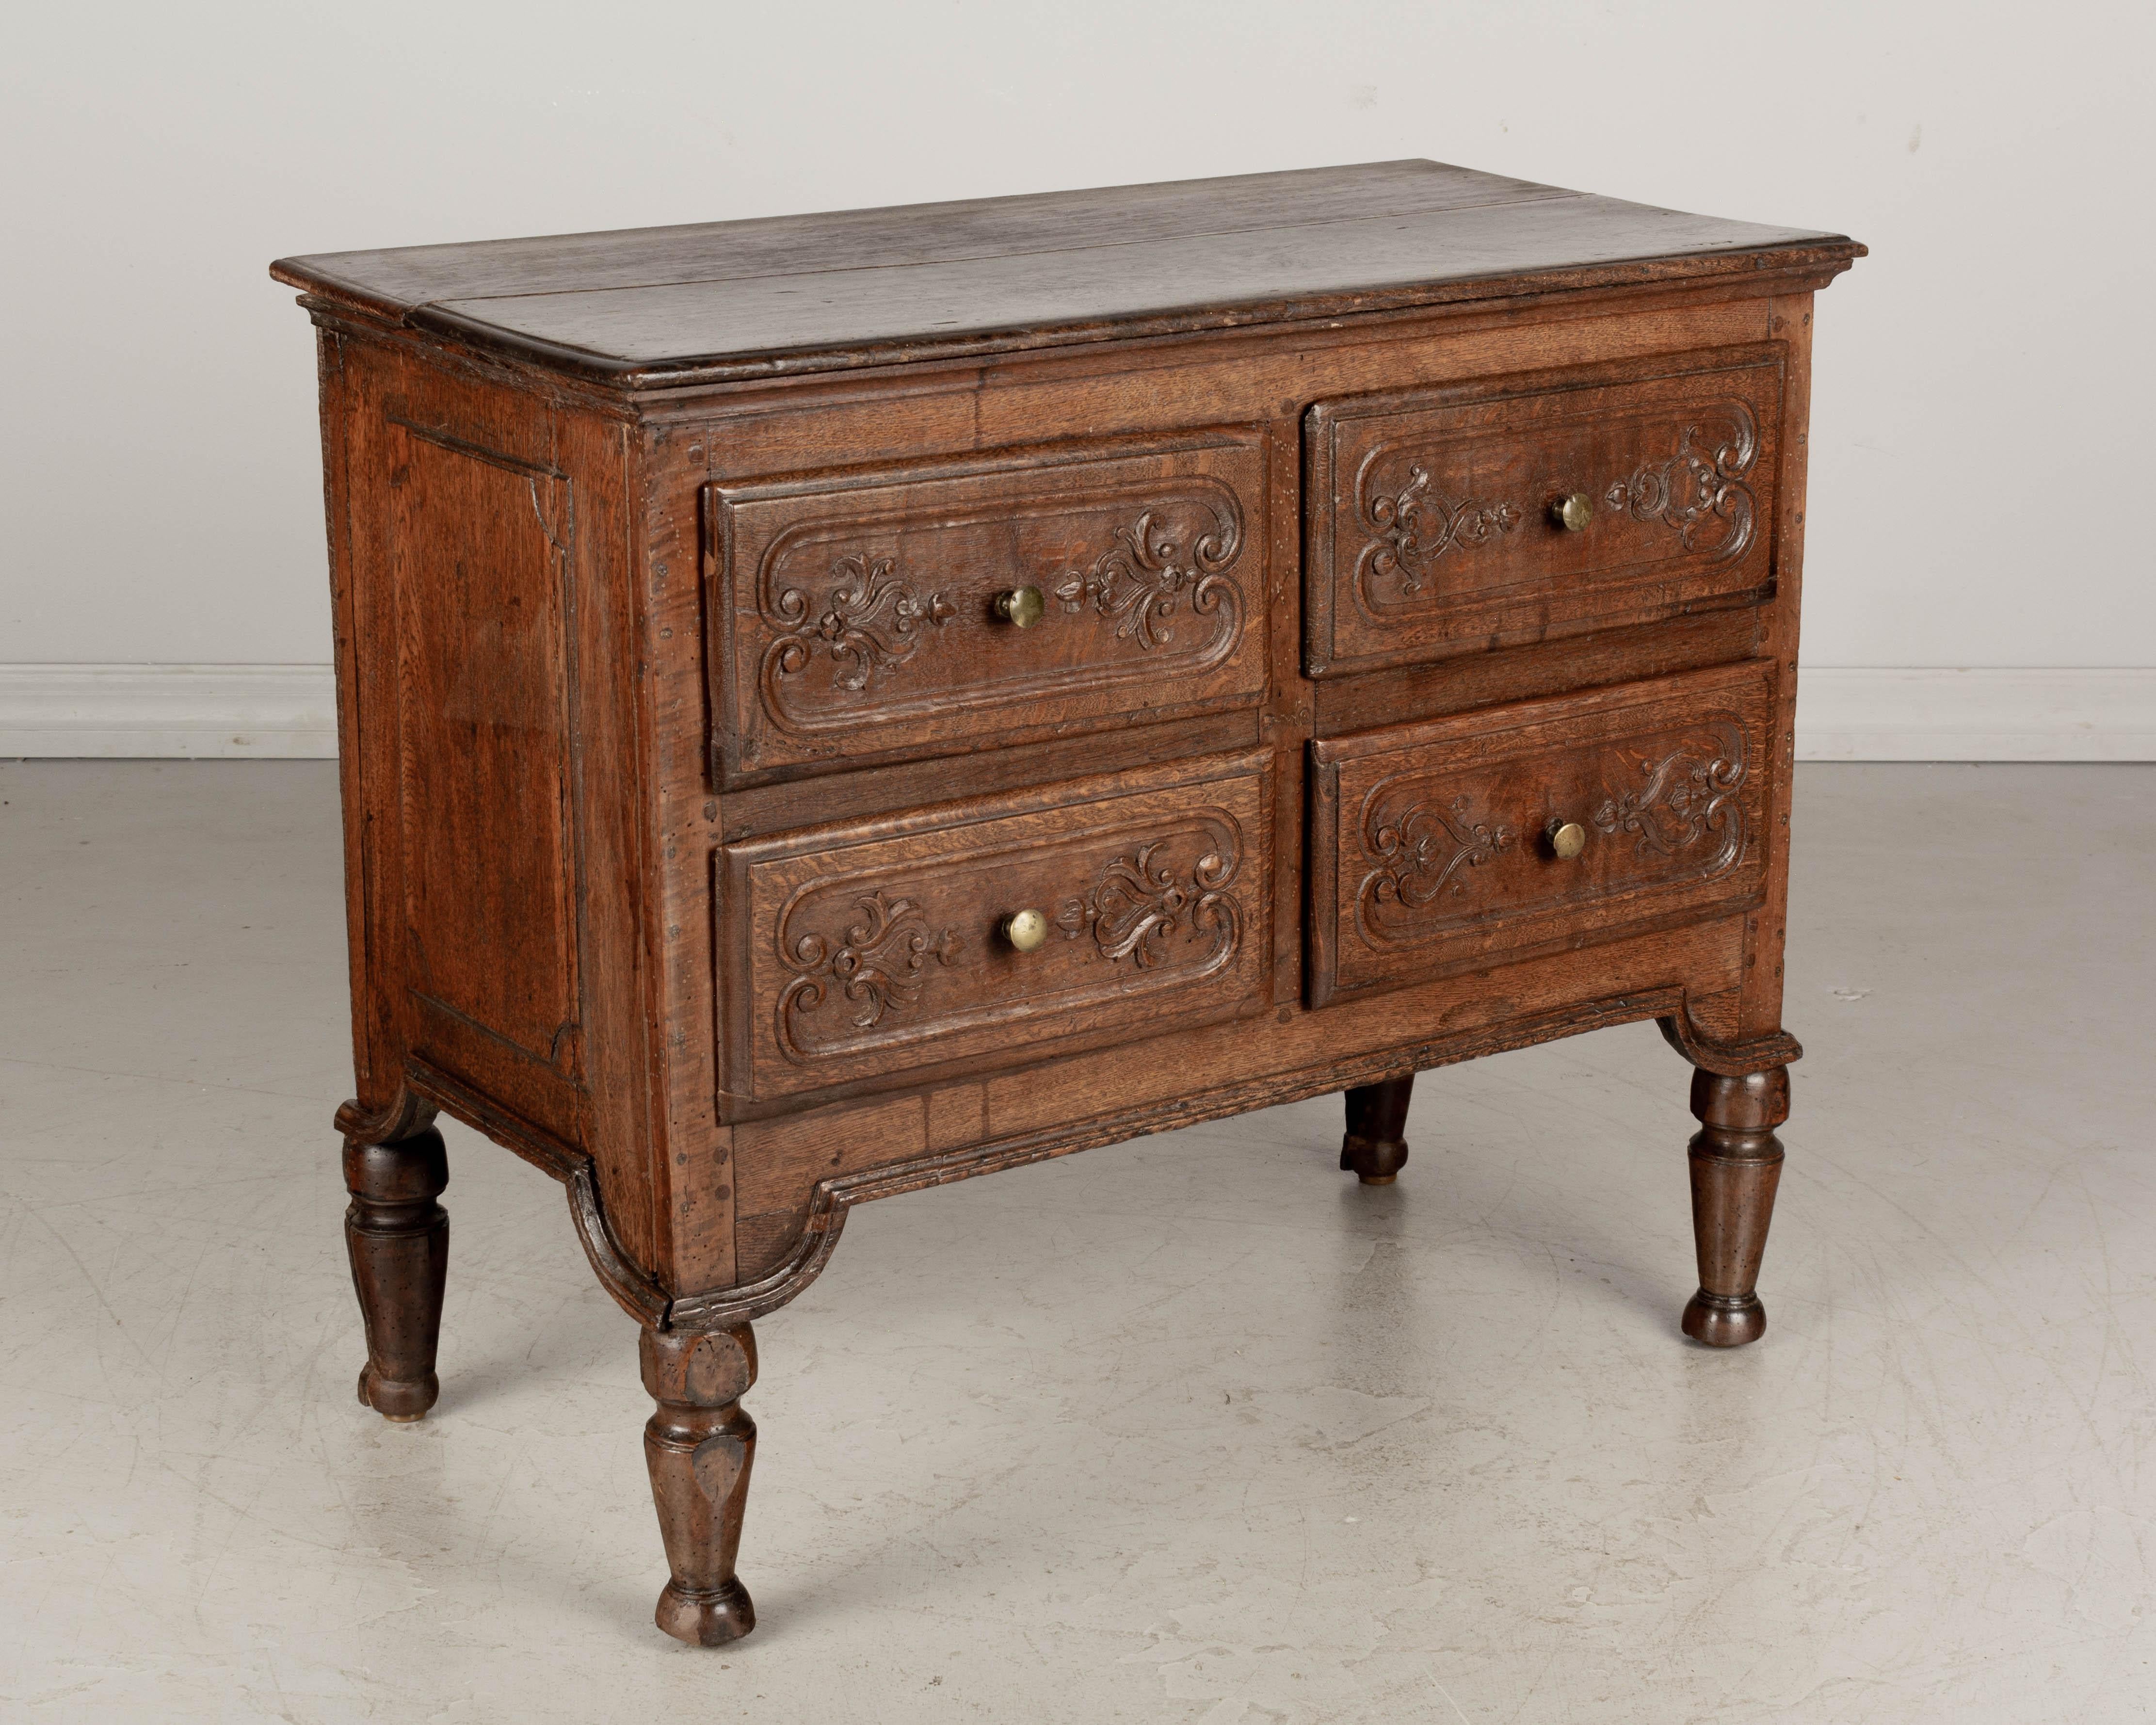 An early 19th century Louis XVI style petite French commode, or chest of drawers made of solid oak. This small commode has carved relief adorned drawers and sturdy turned legs. Waxed patina. Probably from Alsace. A good size for use as a nightstand.